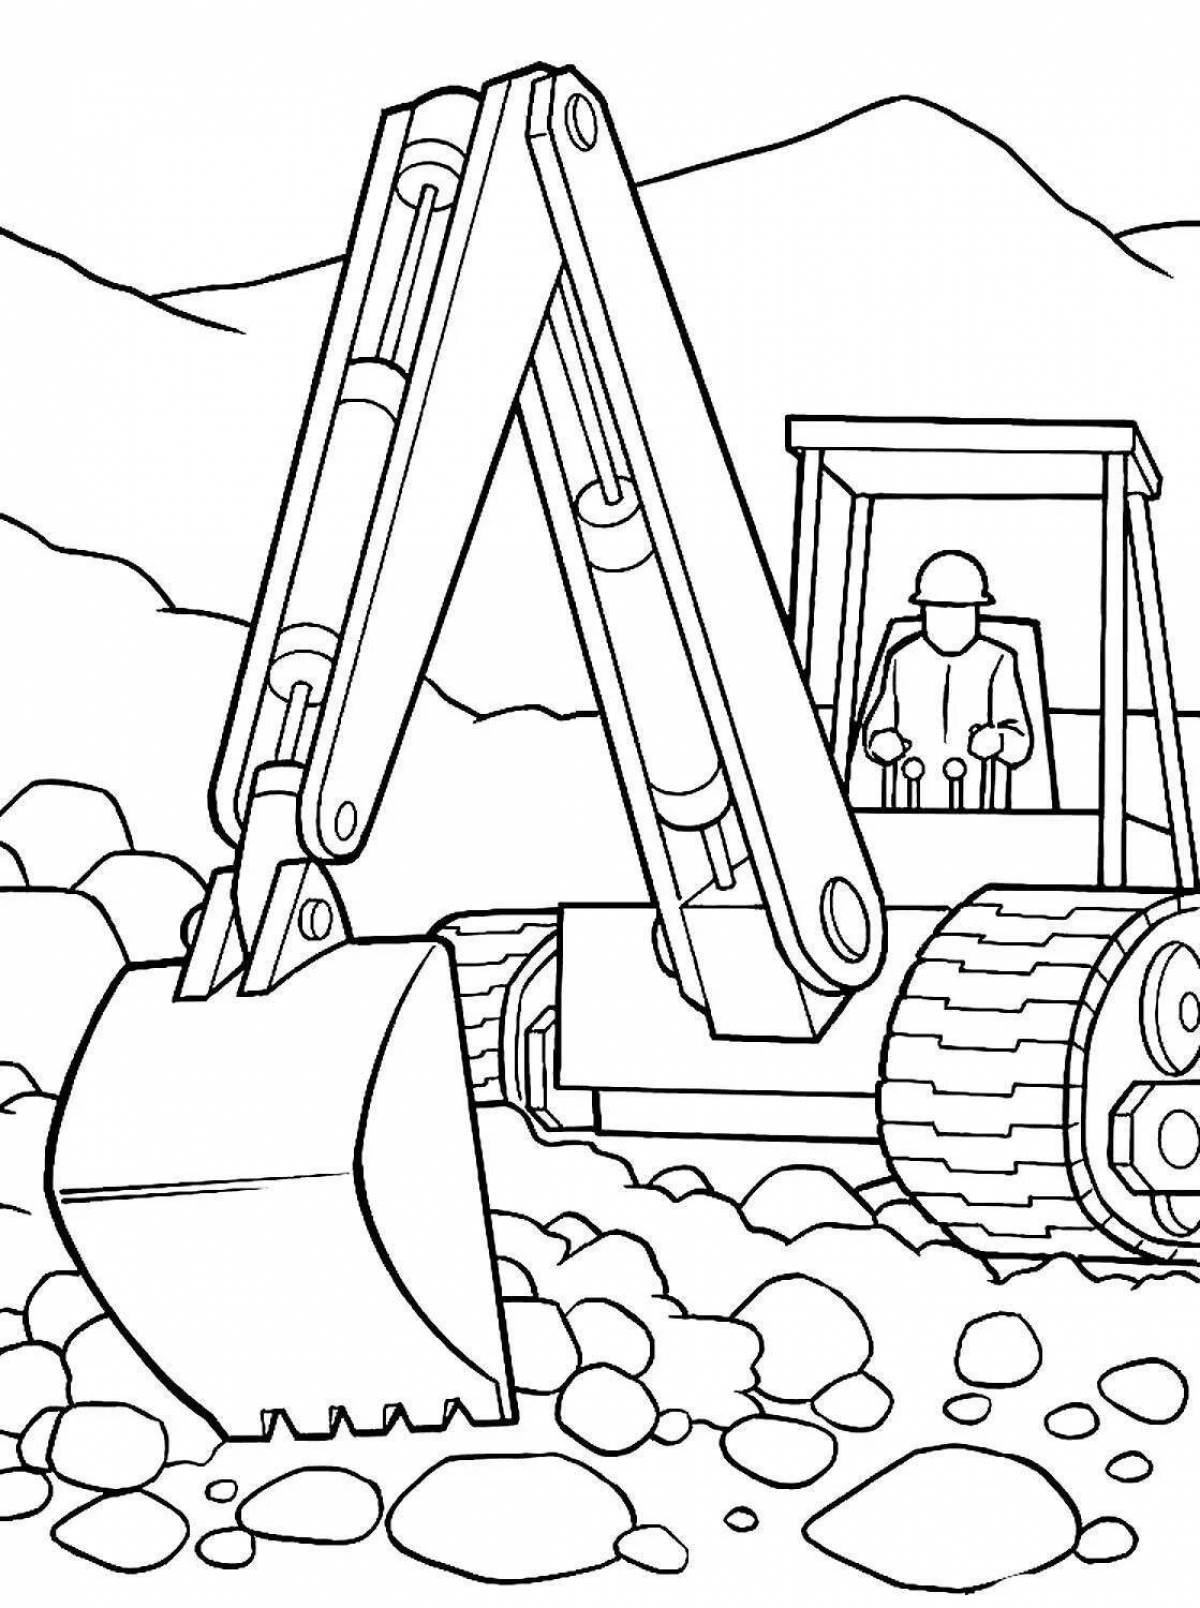 Coloring page nice excavator for boys